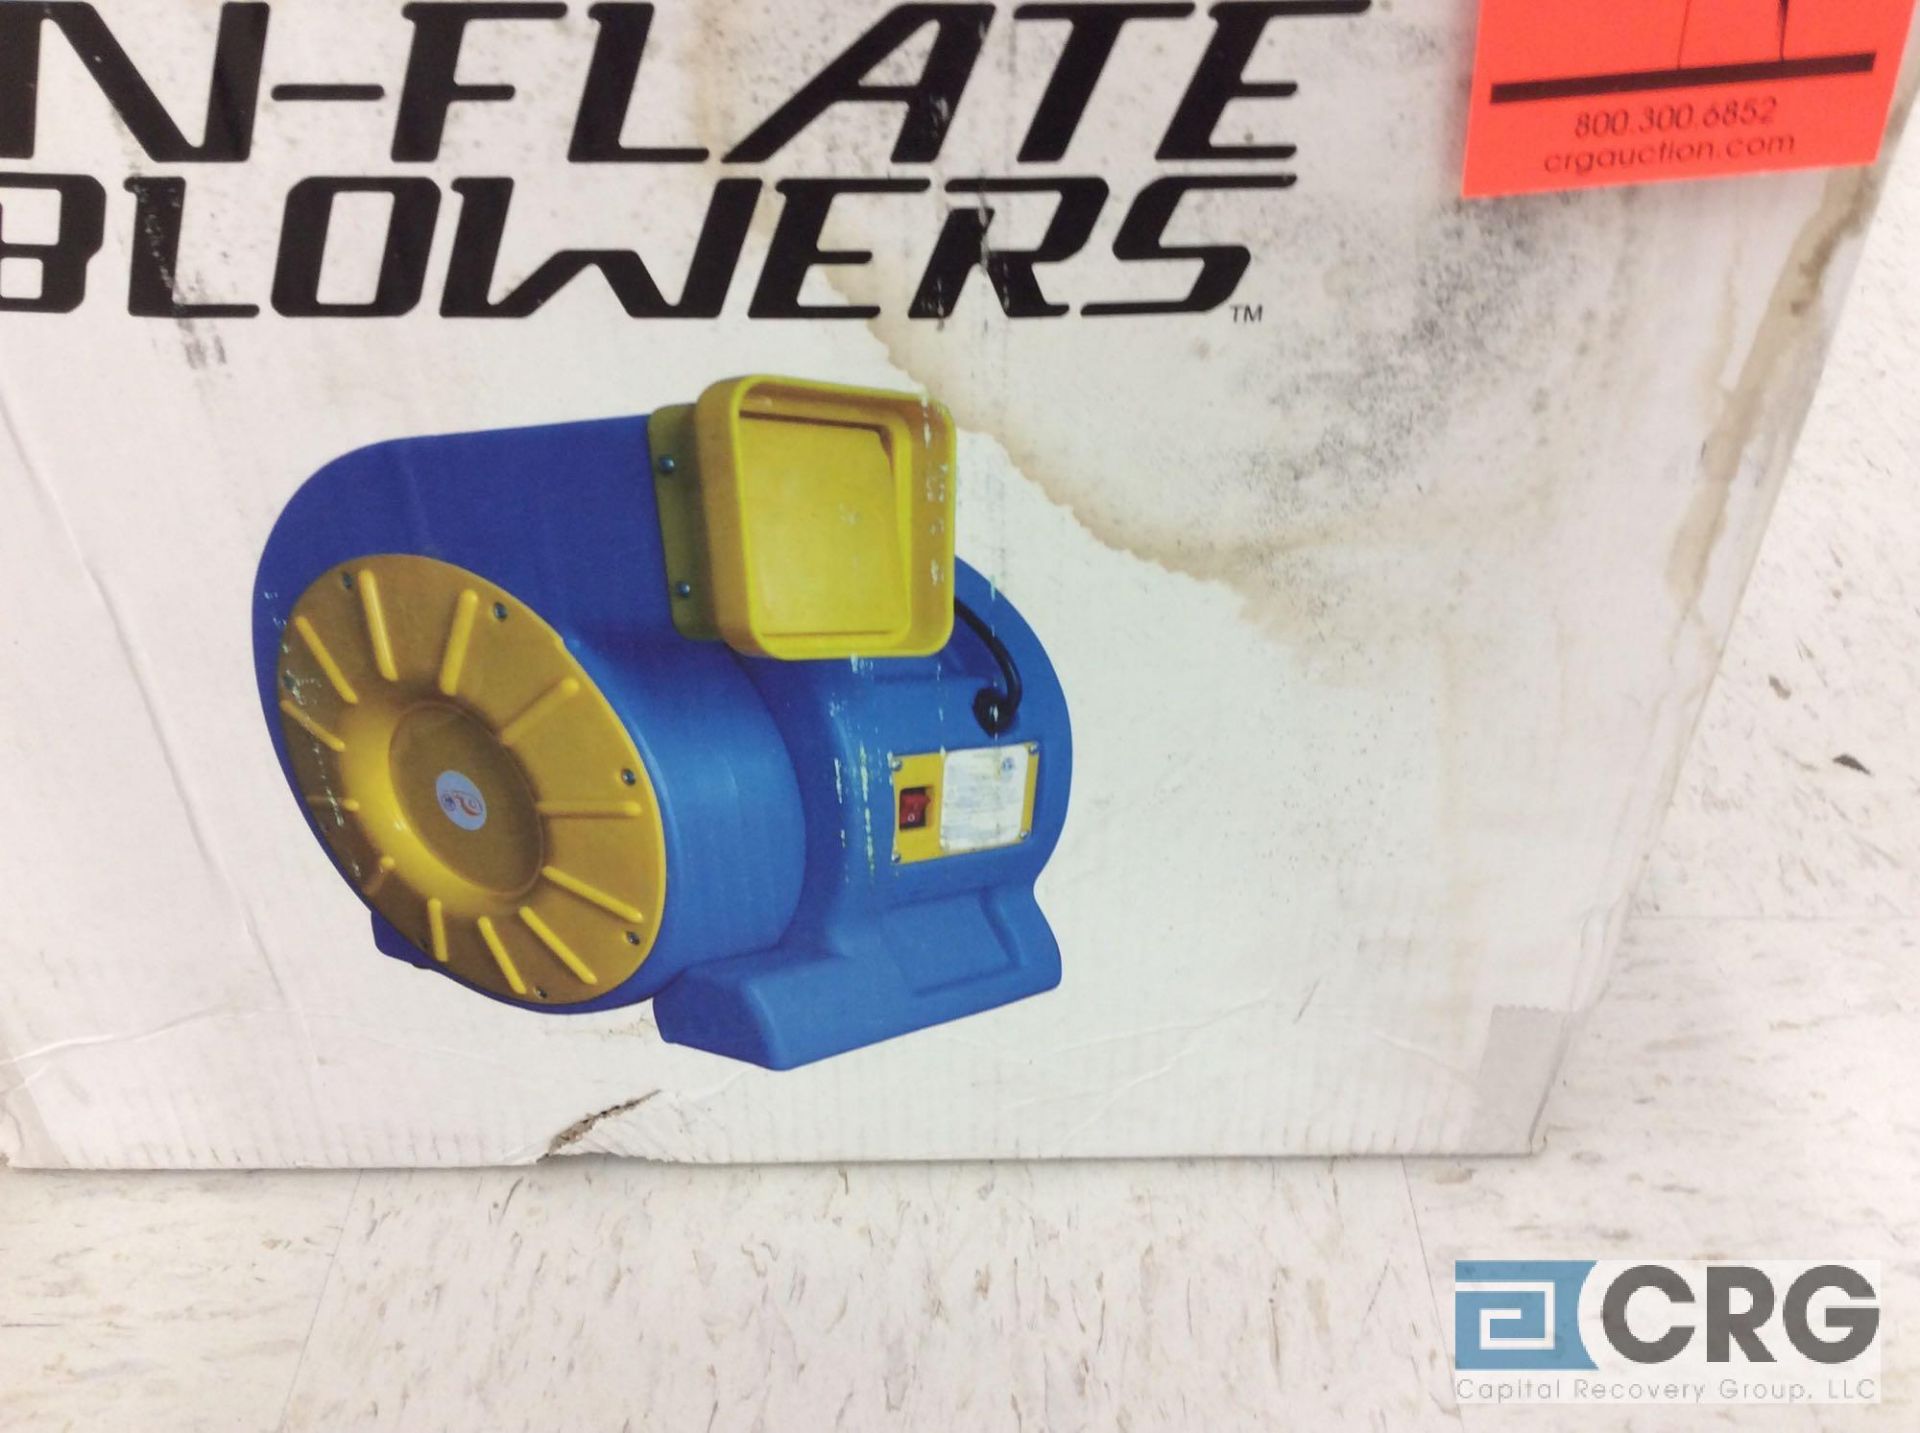 In-Flare Blower, model IF-1, new in box - Image 2 of 3